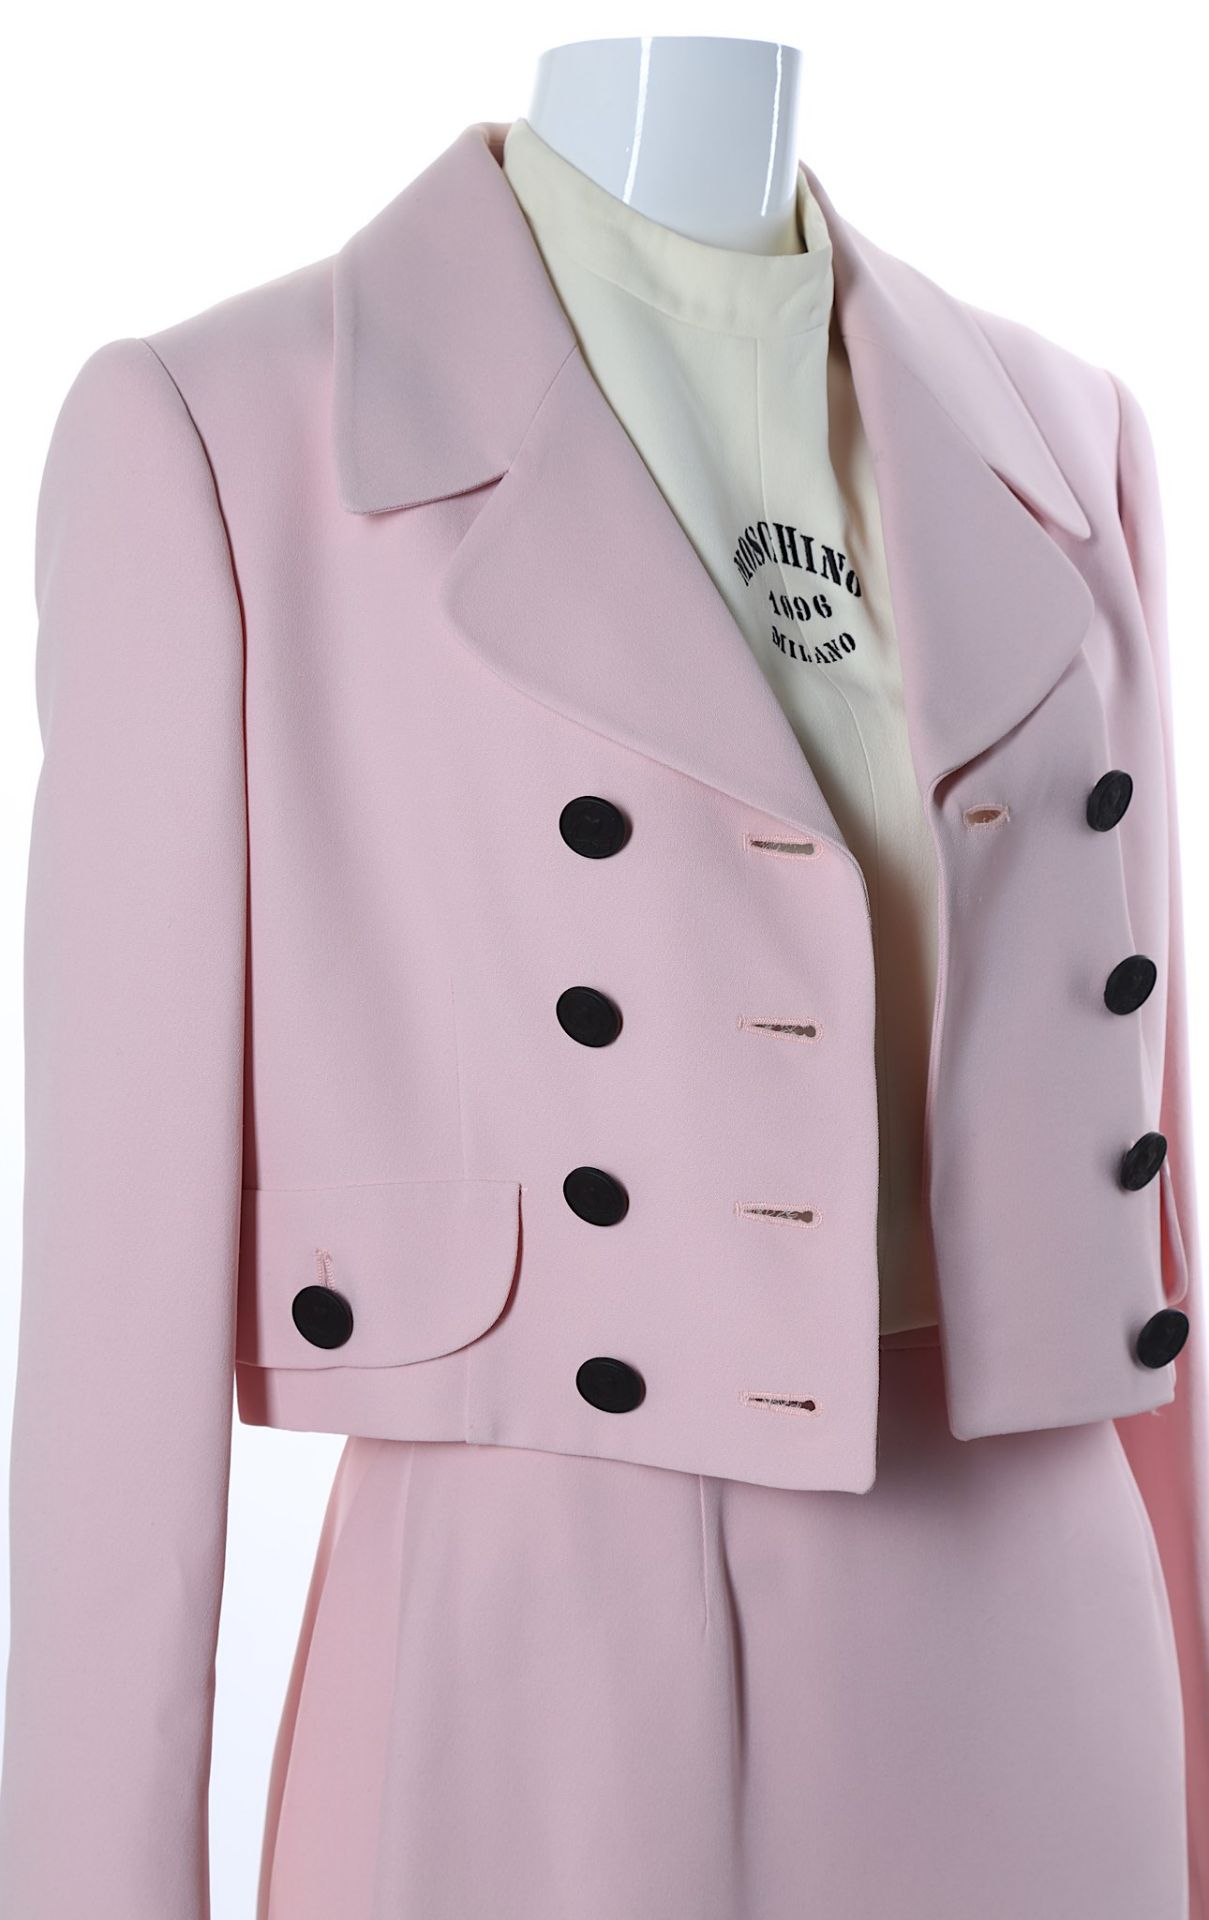 Moschino Cheap and Chic Pink Skirt Suit, 1990s, wi - Image 4 of 10